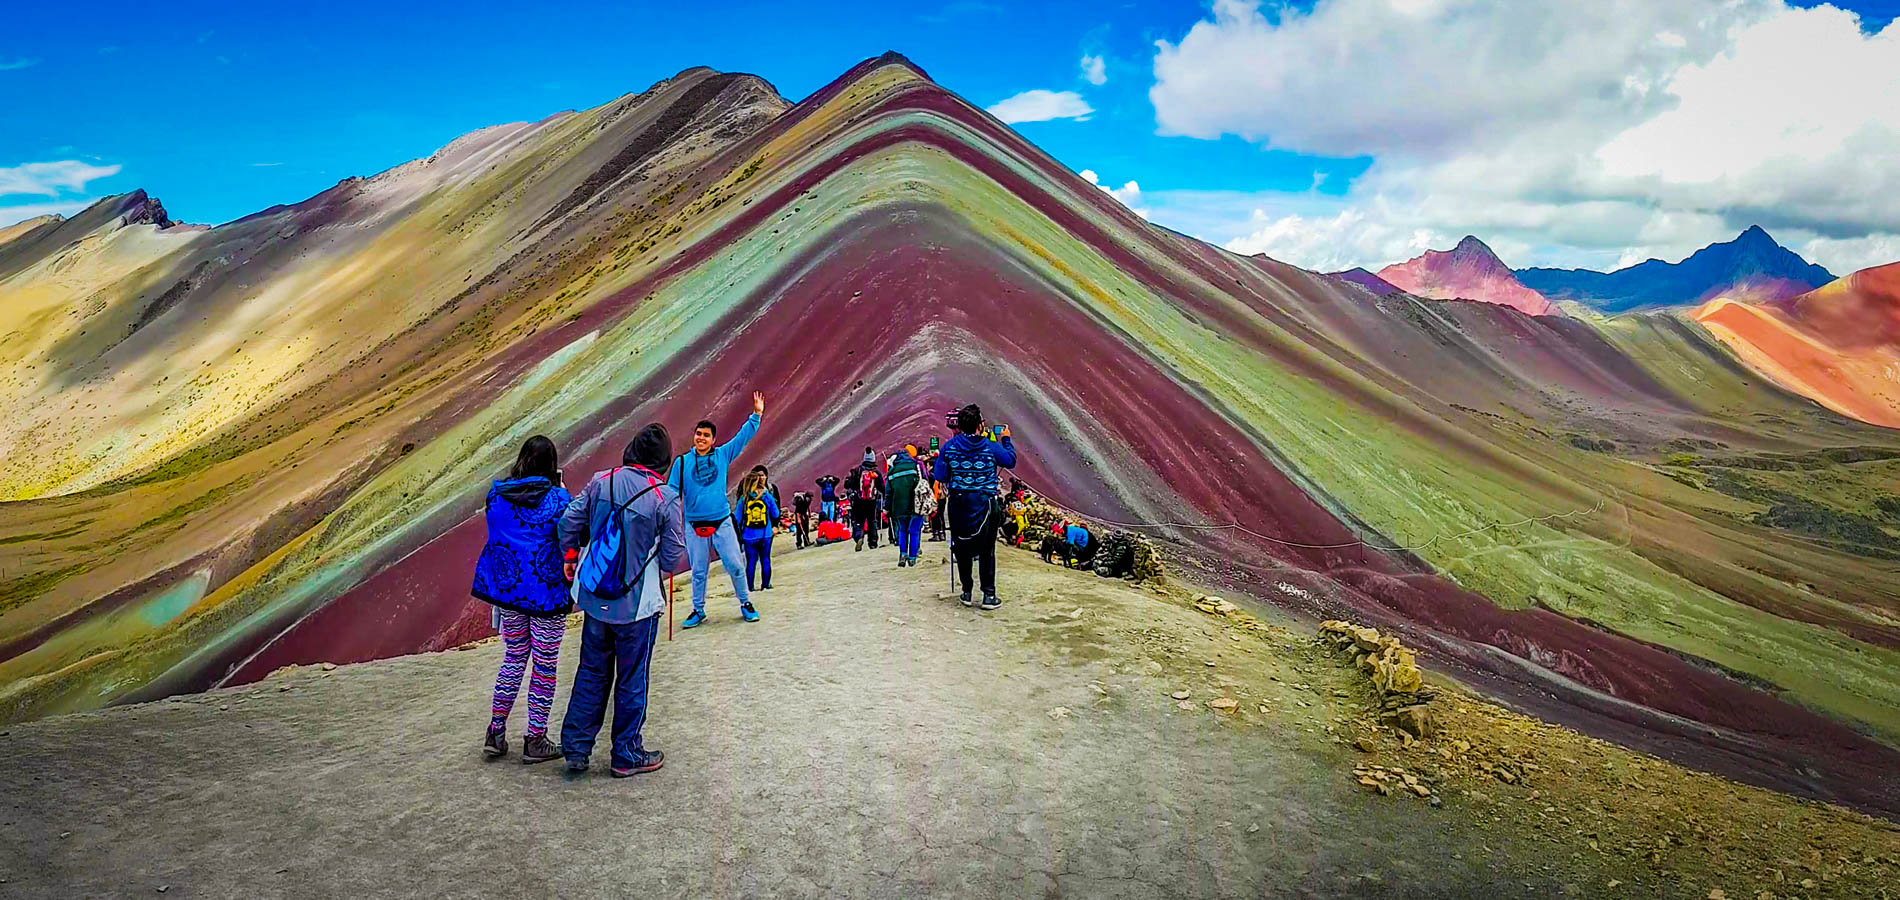 Little Known Facts About Rainbow Mountain, Peru Andean Trails | vlr.eng.br